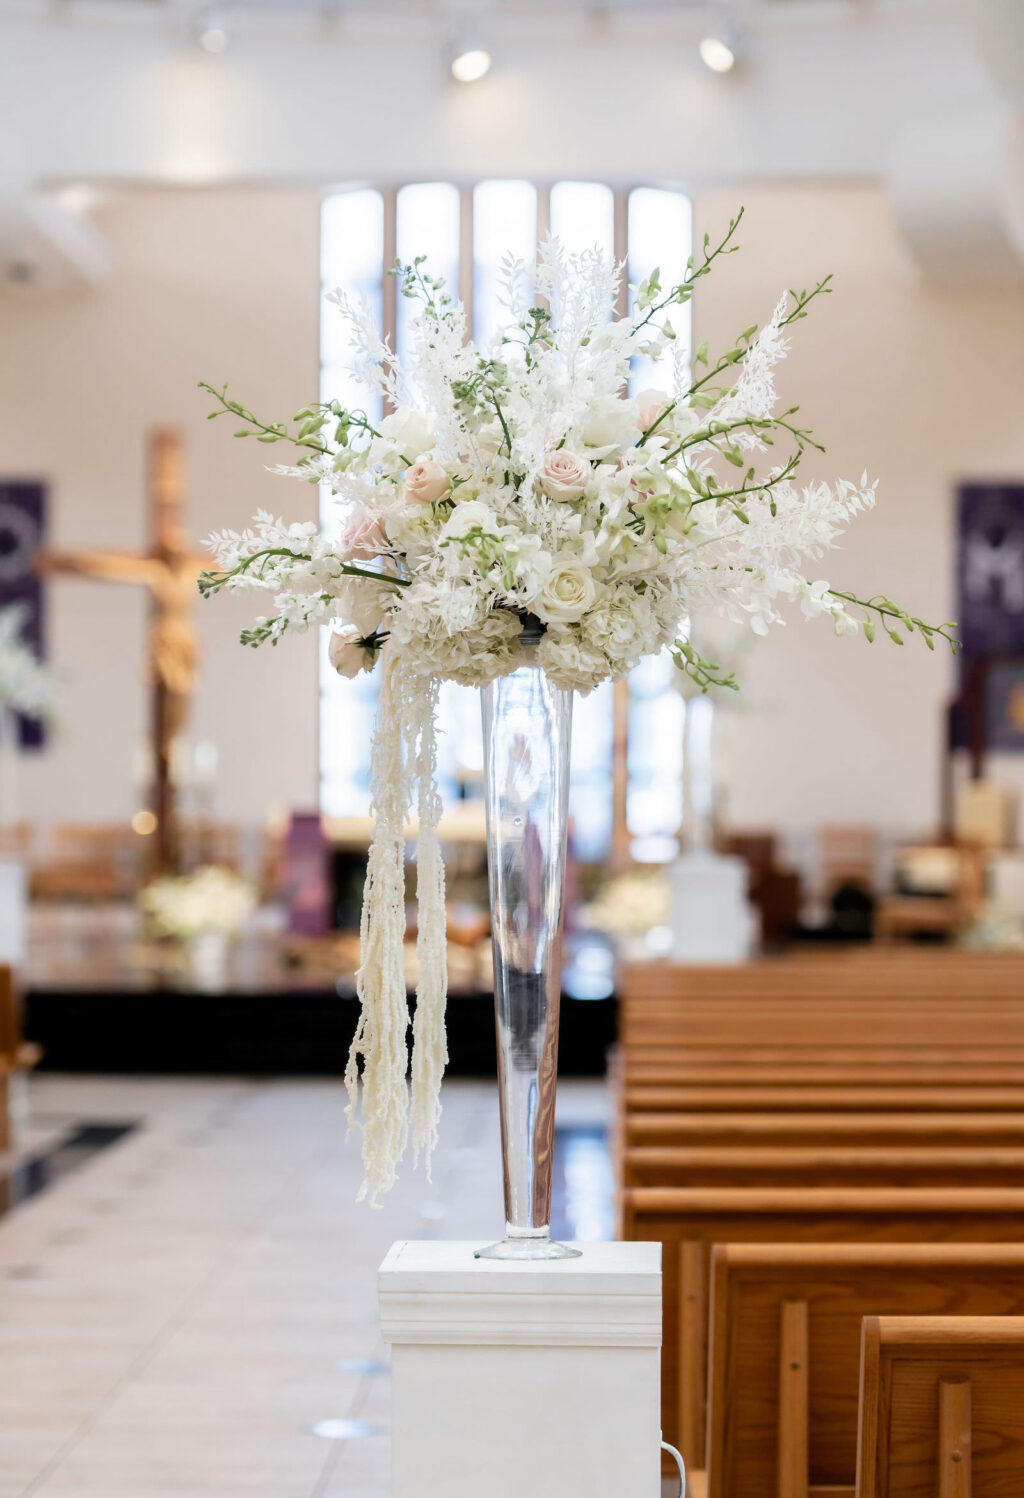 Classic Wedding Ceremony Decor, Tall Glass Cylinder Vase with White Flowers and Hanging Amaranthus | Tampa Bay Wedding Planner Elegant Affairs by Design